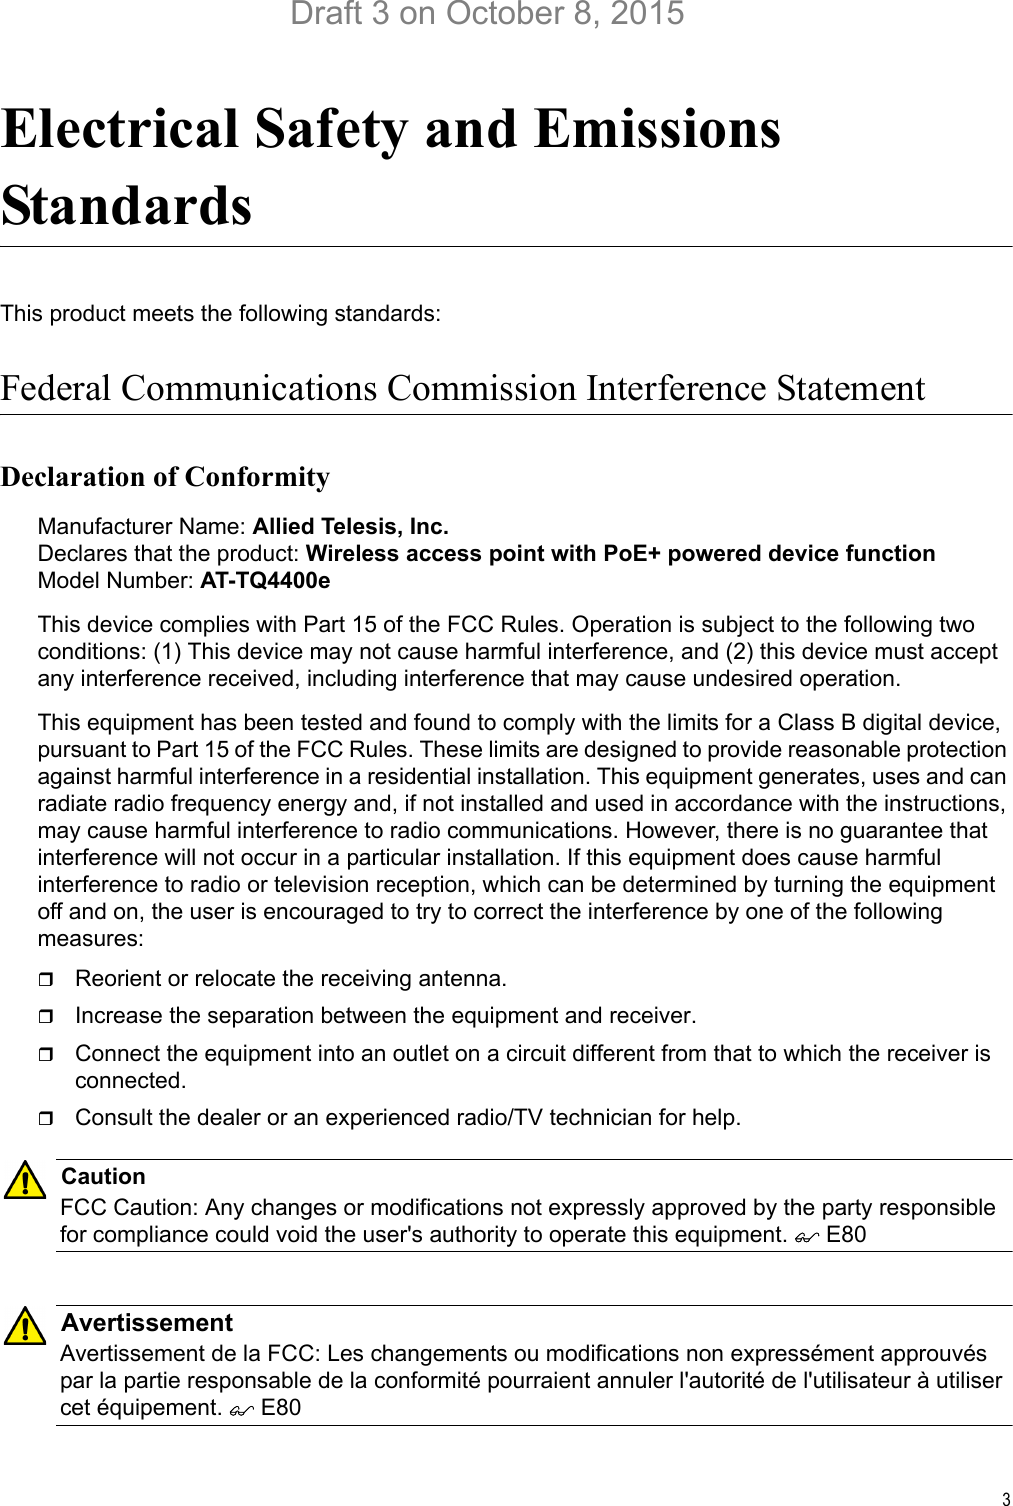 3Electrical Safety and Emissions StandardsThis product meets the following standards:Federal Communications Commission Interference StatementDeclaration of ConformityManufacturer Name: Allied Telesis, Inc.Declares that the product: Wireless access point with PoE+ powered device functionModel Number: AT-TQ4400eThis device complies with Part 15 of the FCC Rules. Operation is subject to the following two conditions: (1) This device may not cause harmful interference, and (2) this device must accept any interference received, including interference that may cause undesired operation.This equipment has been tested and found to comply with the limits for a Class B digital device, pursuant to Part 15 of the FCC Rules. These limits are designed to provide reasonable protection against harmful interference in a residential installation. This equipment generates, uses and can radiate radio frequency energy and, if not installed and used in accordance with the instructions, may cause harmful interference to radio communications. However, there is no guarantee that interference will not occur in a particular installation. If this equipment does cause harmful interference to radio or television reception, which can be determined by turning the equipment off and on, the user is encouraged to try to correct the interference by one of the following measures:Reorient or relocate the receiving antenna.Increase the separation between the equipment and receiver.Connect the equipment into an outlet on a circuit different from that to which the receiver is connected.Consult the dealer or an experienced radio/TV technician for help.CautionFCC Caution: Any changes or modifications not expressly approved by the party responsible for compliance could void the user&apos;s authority to operate this equipment.  E80AvertissementAvertissement de la FCC: Les changements ou modifications non expressément approuvés par la partie responsable de la conformité pourraient annuler l&apos;autorité de l&apos;utilisateur à utiliser cet équipement.  E80Draft 3 on October 8, 2015